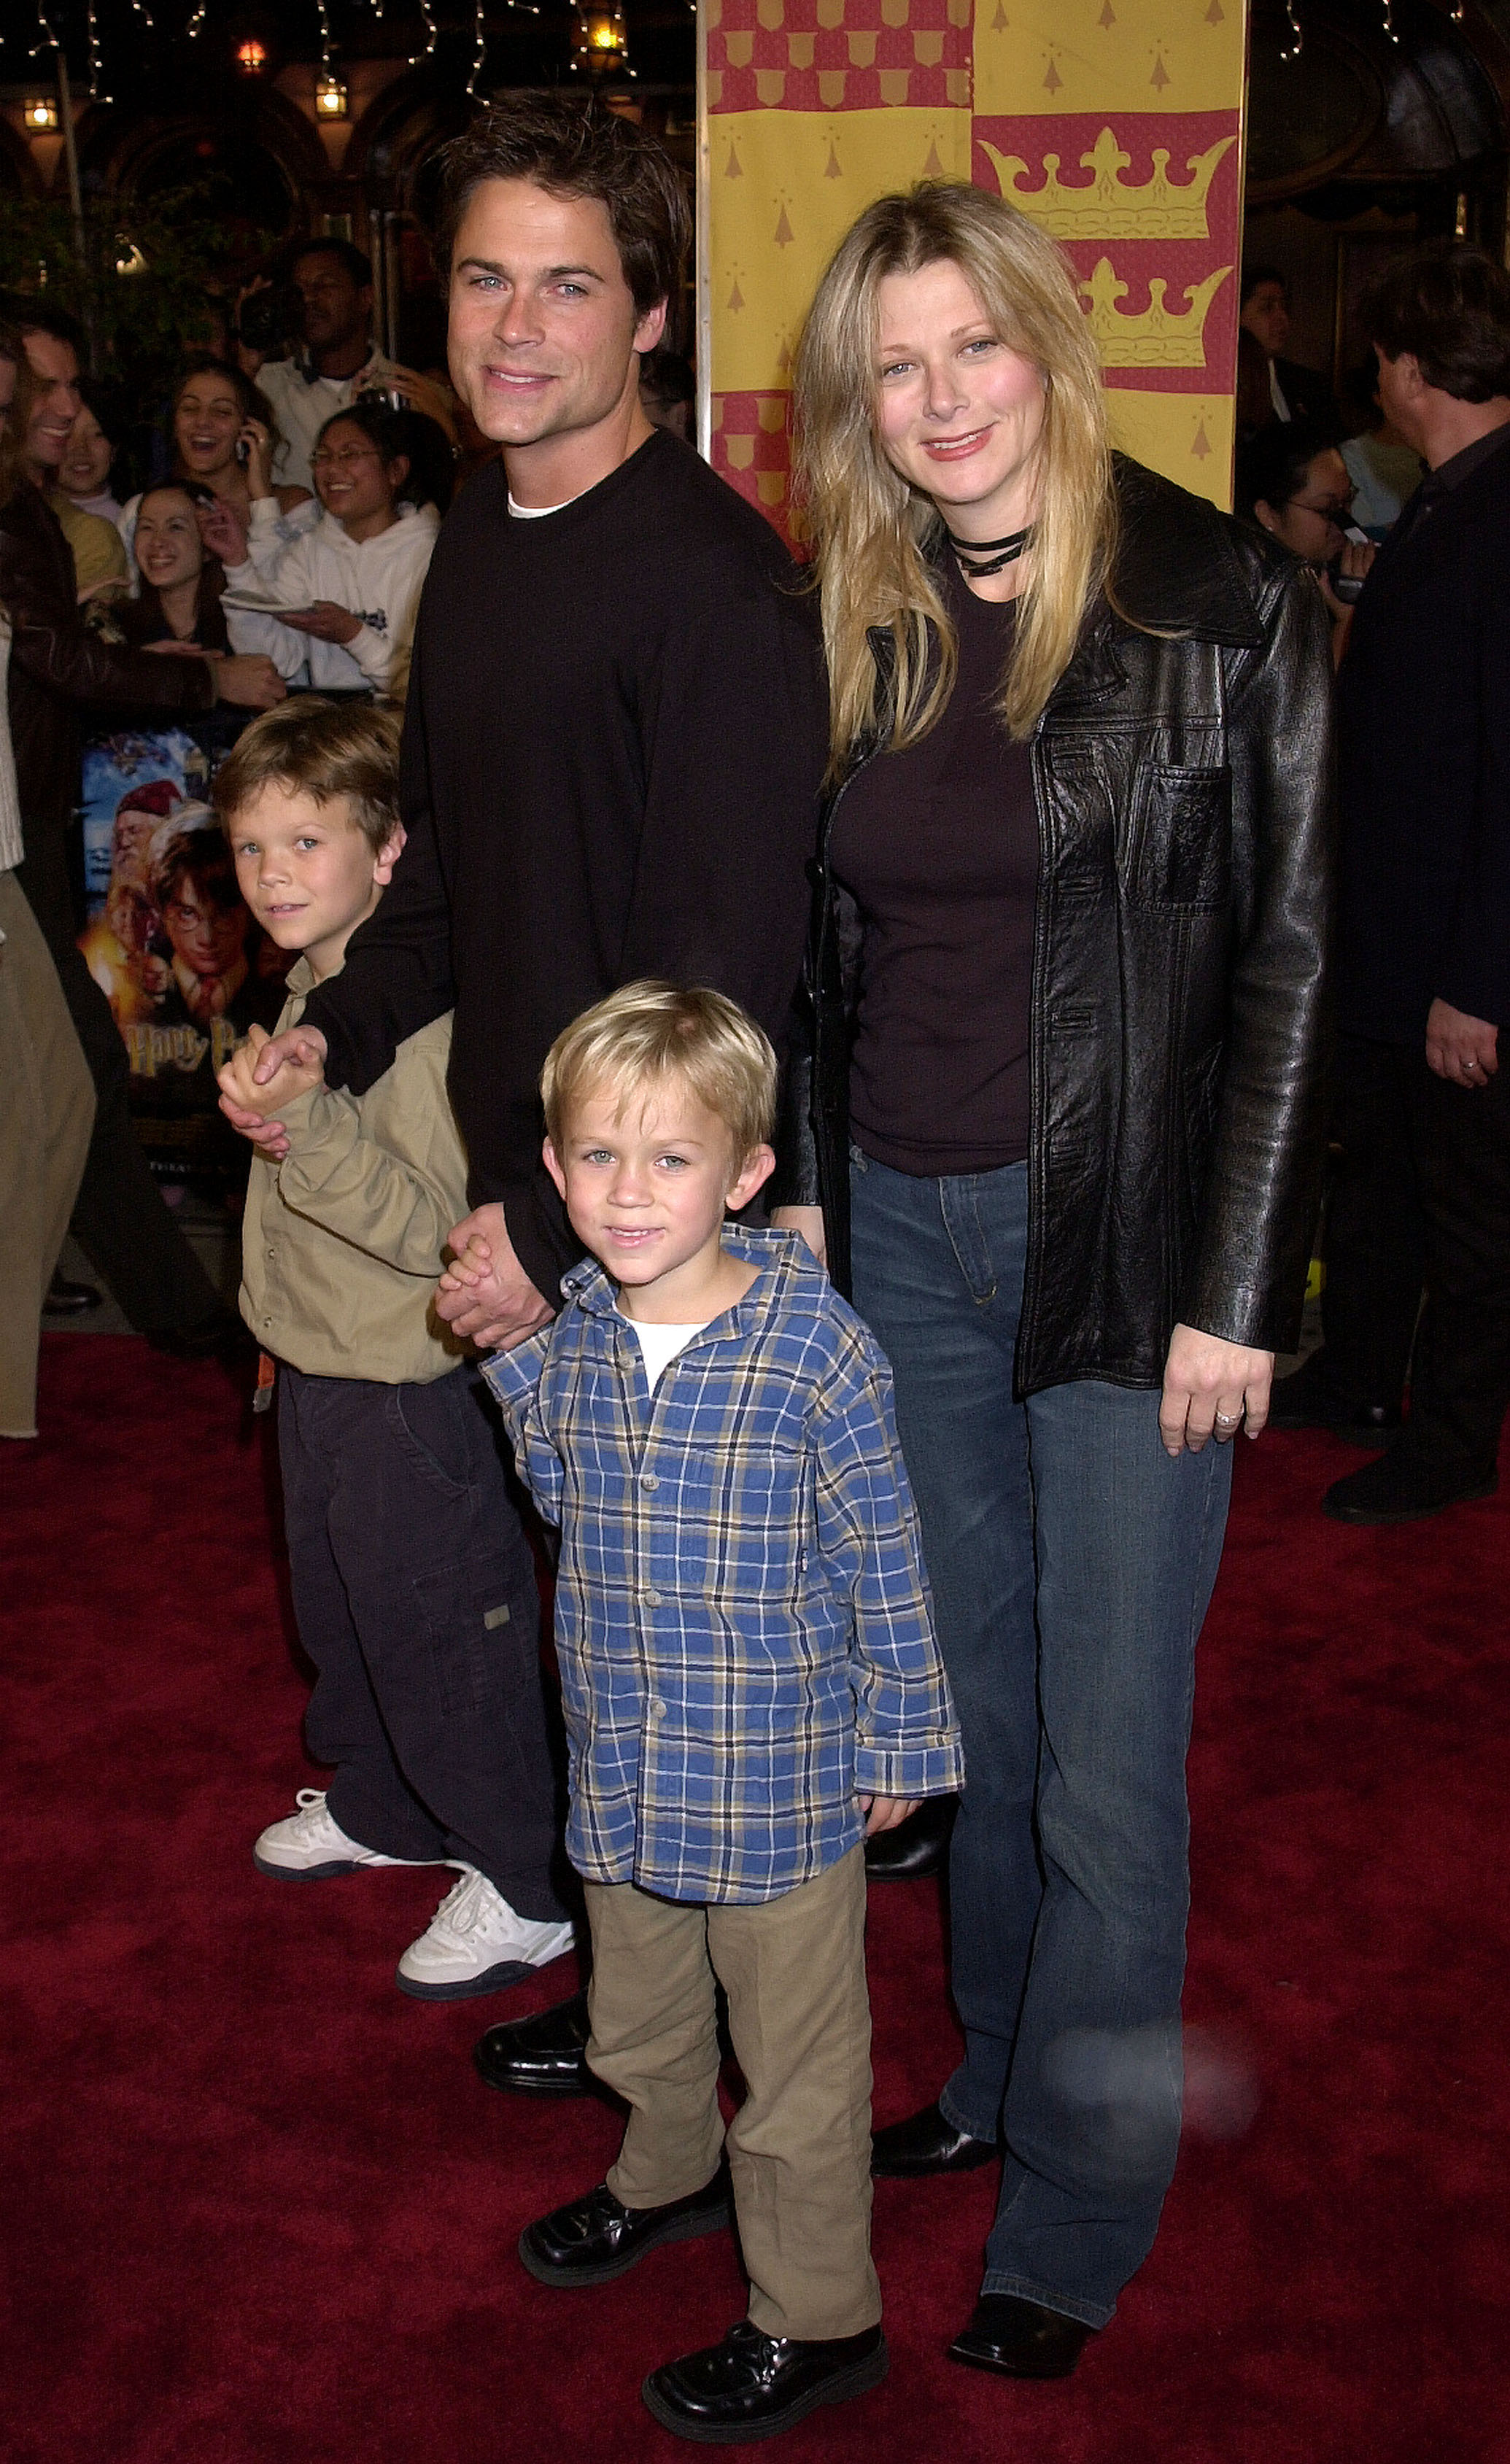 Rob Lowe, Sheryl Berkoff, and their children at the "Harry Potter and the Sorcerer's Stone" Los Angeles premiere | Source: Getty Images